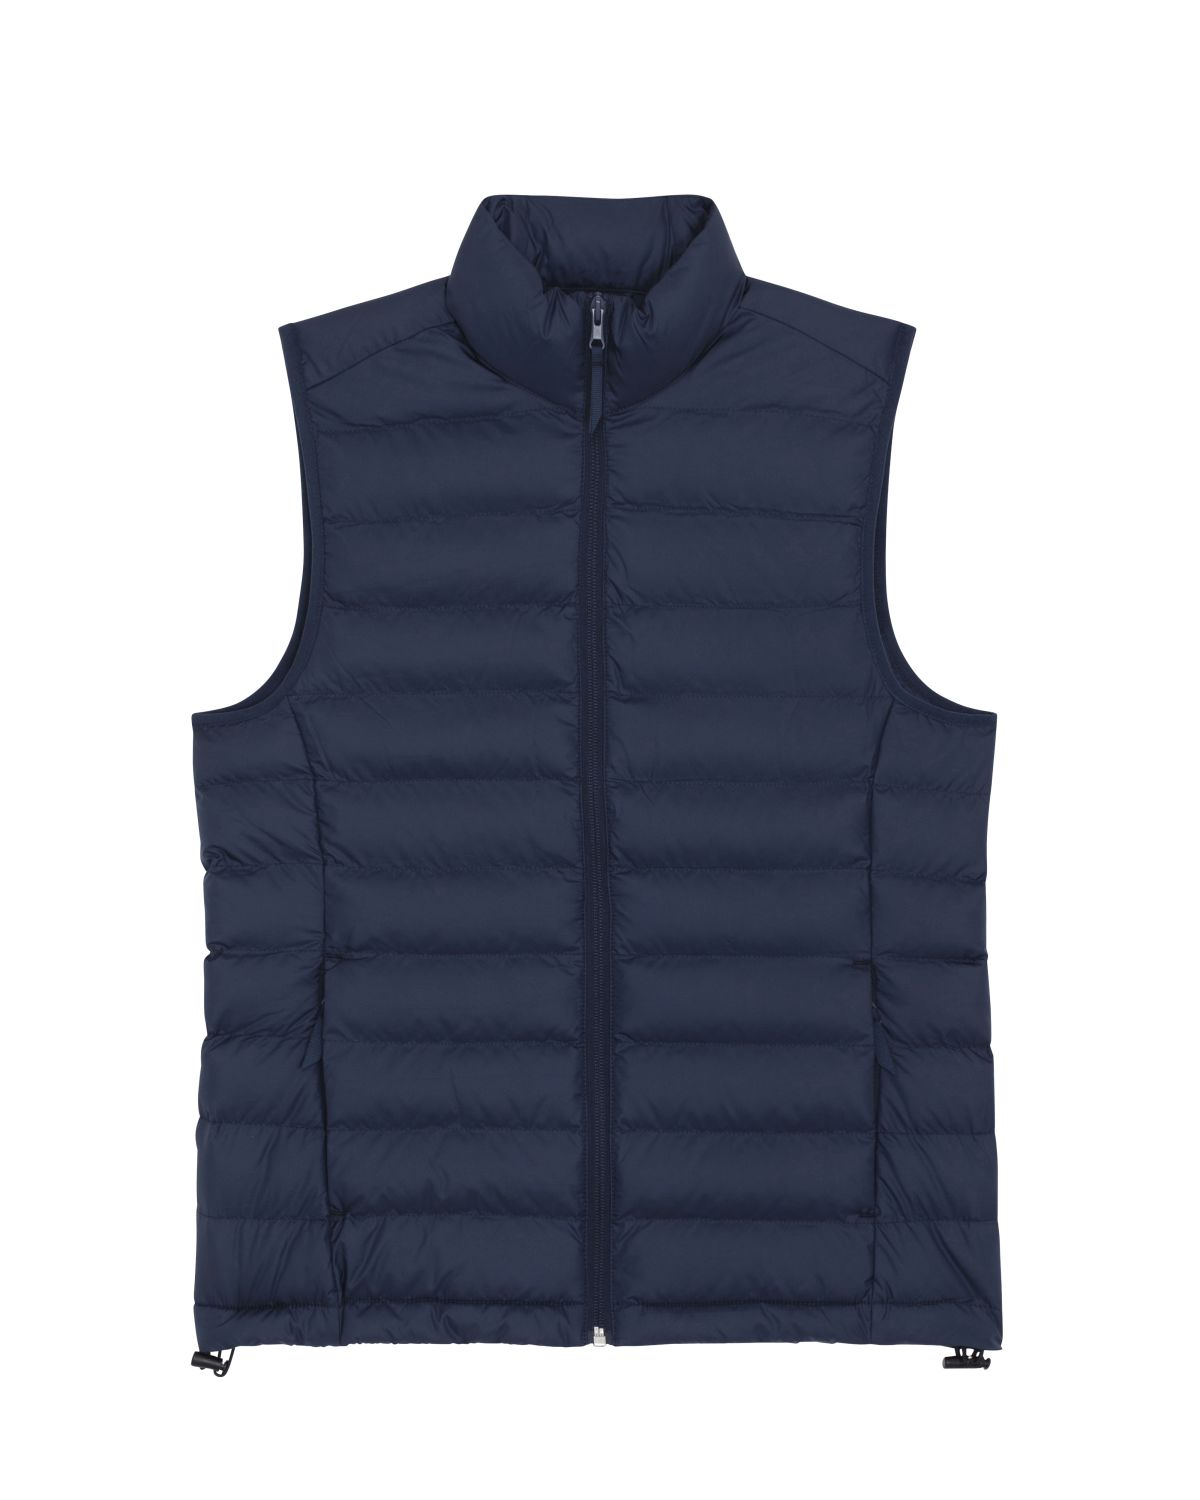 Customize your own Vest